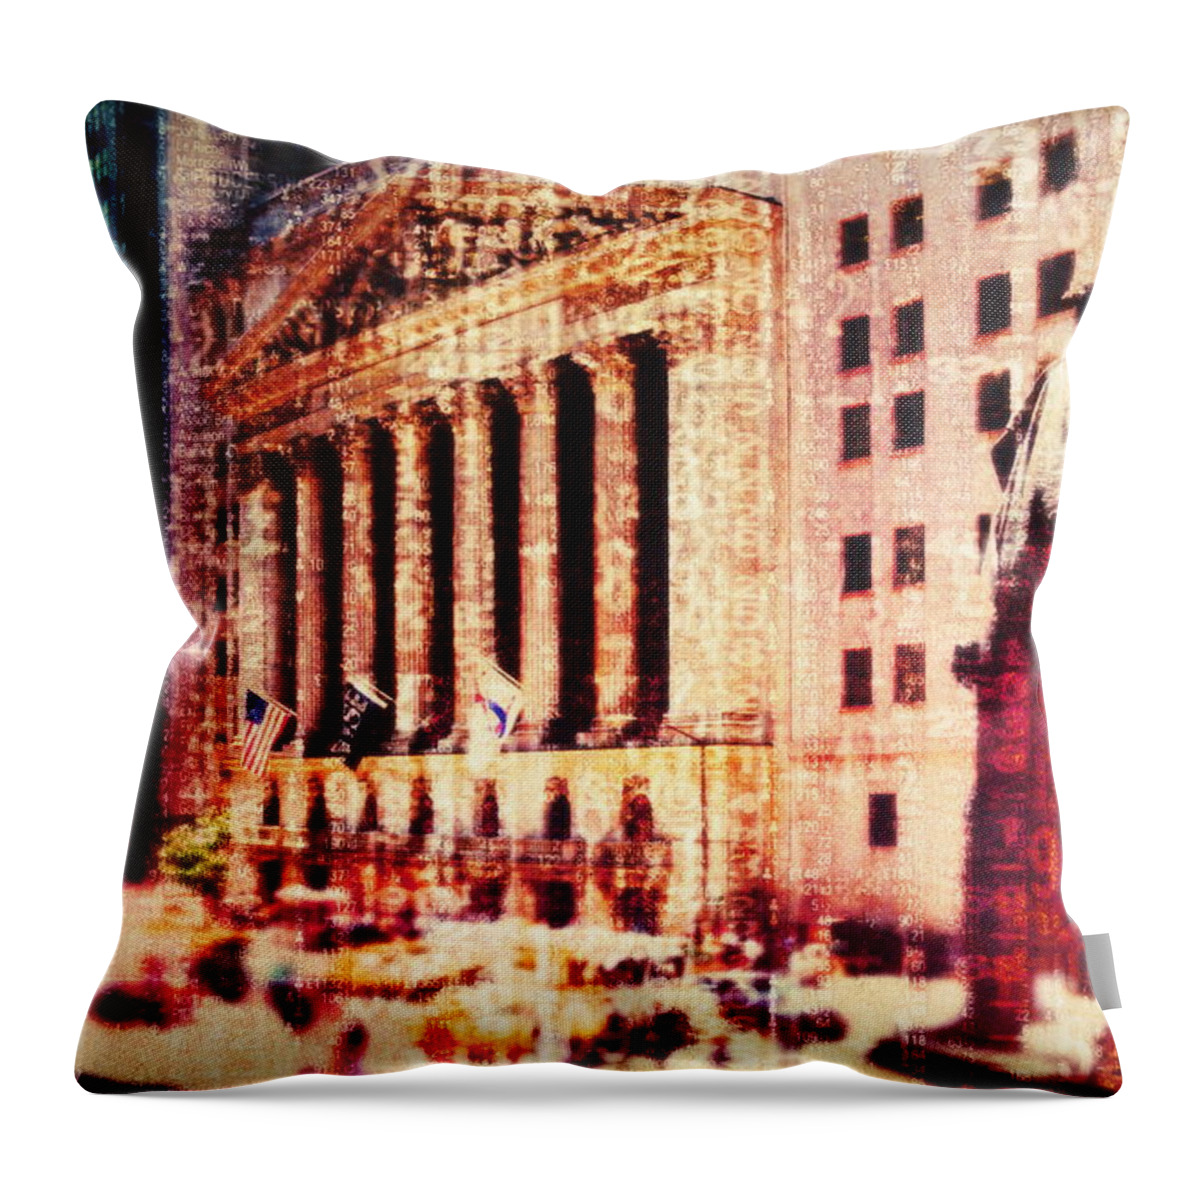 Financial Figures Throw Pillow featuring the photograph Usa, New York City, Wall Street, And by Doug Armand